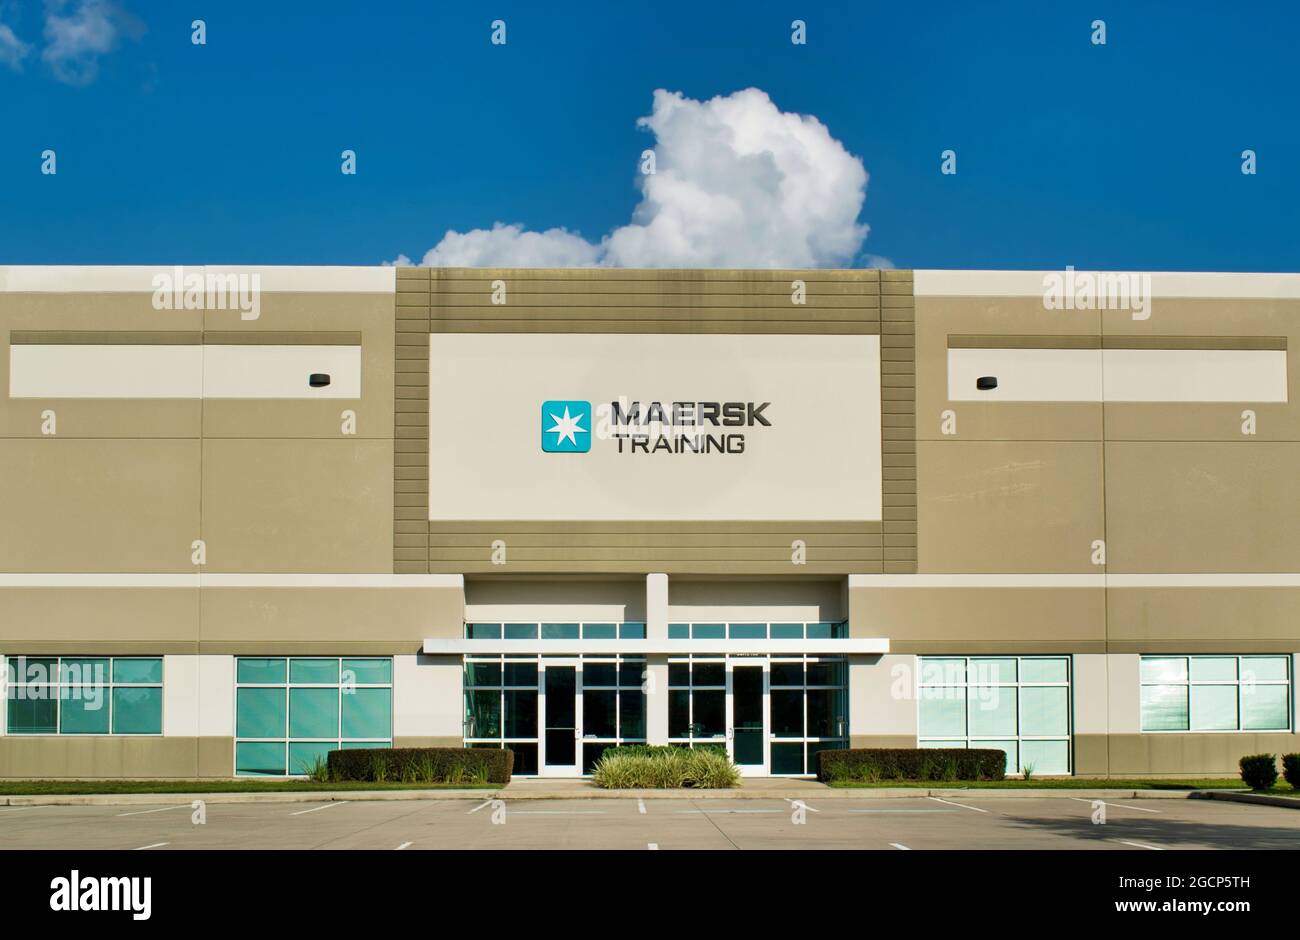 Houston, Texas USA 10-06-2019: Maersk Training Center in Houston, TX. Used to train teams of drilling workers with simulators. Stock Photo